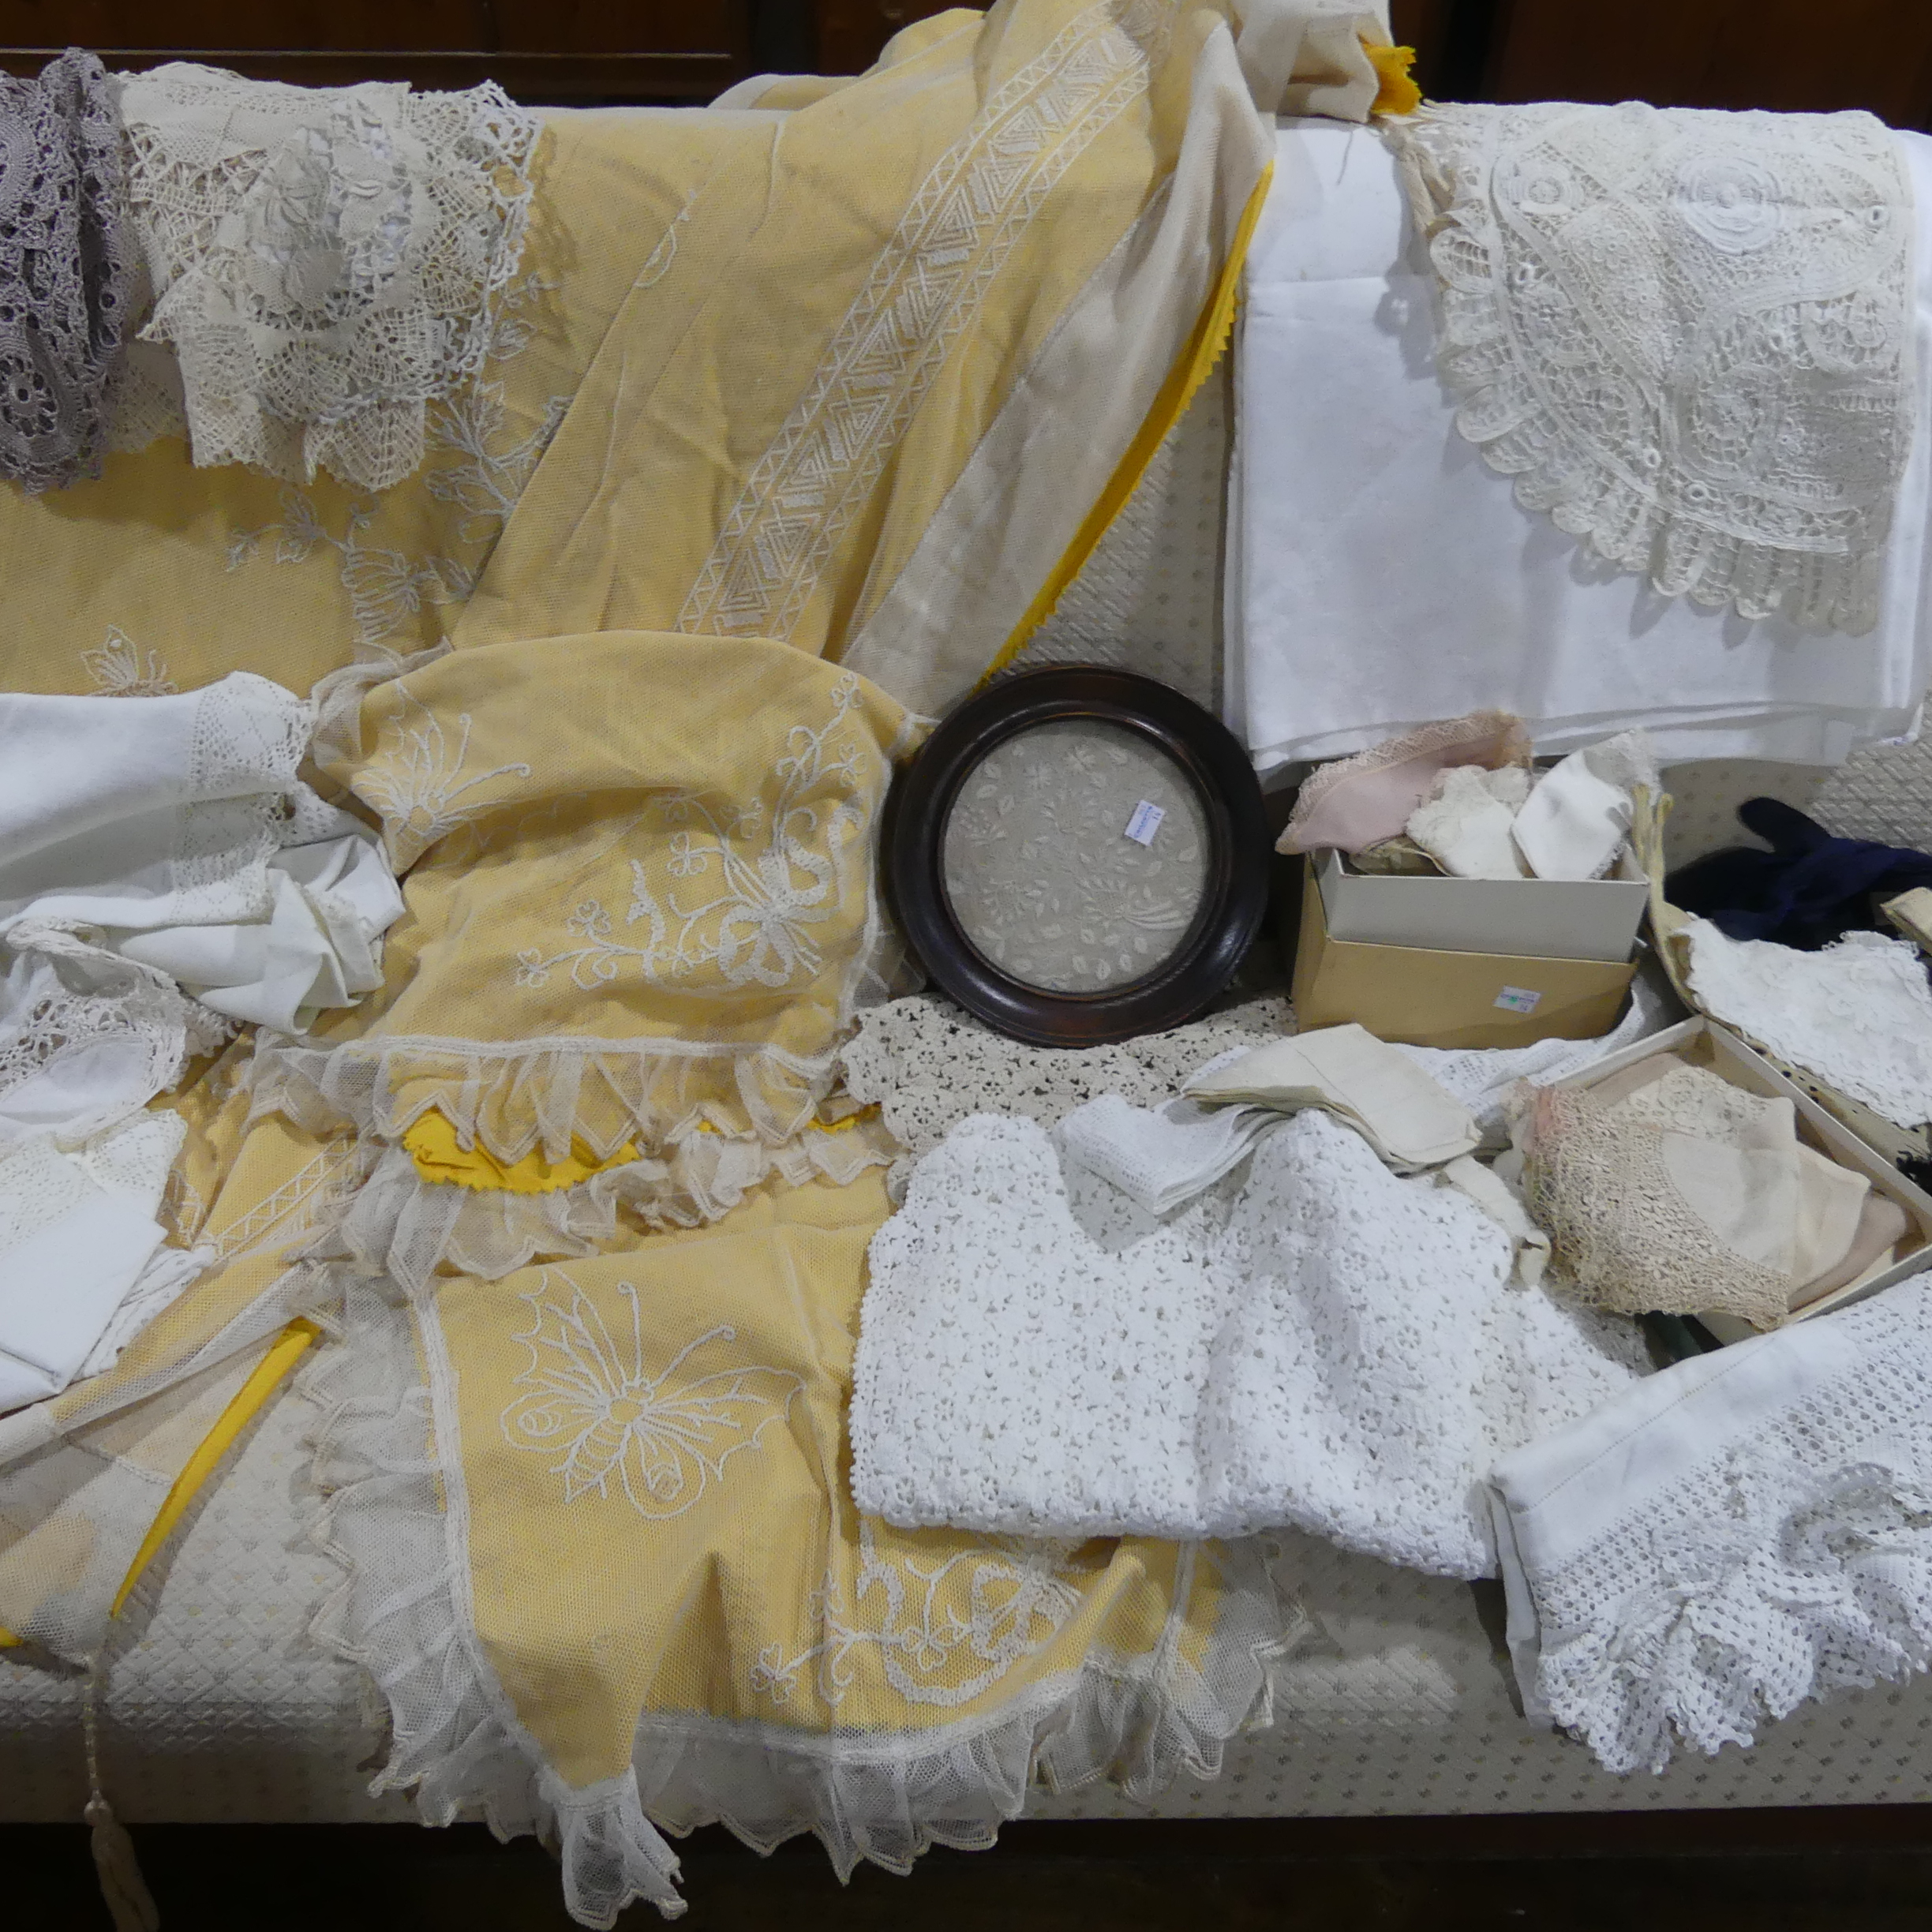 A quantity of Vintage Textiles, including crochet placemats, damask tablecloth, silk